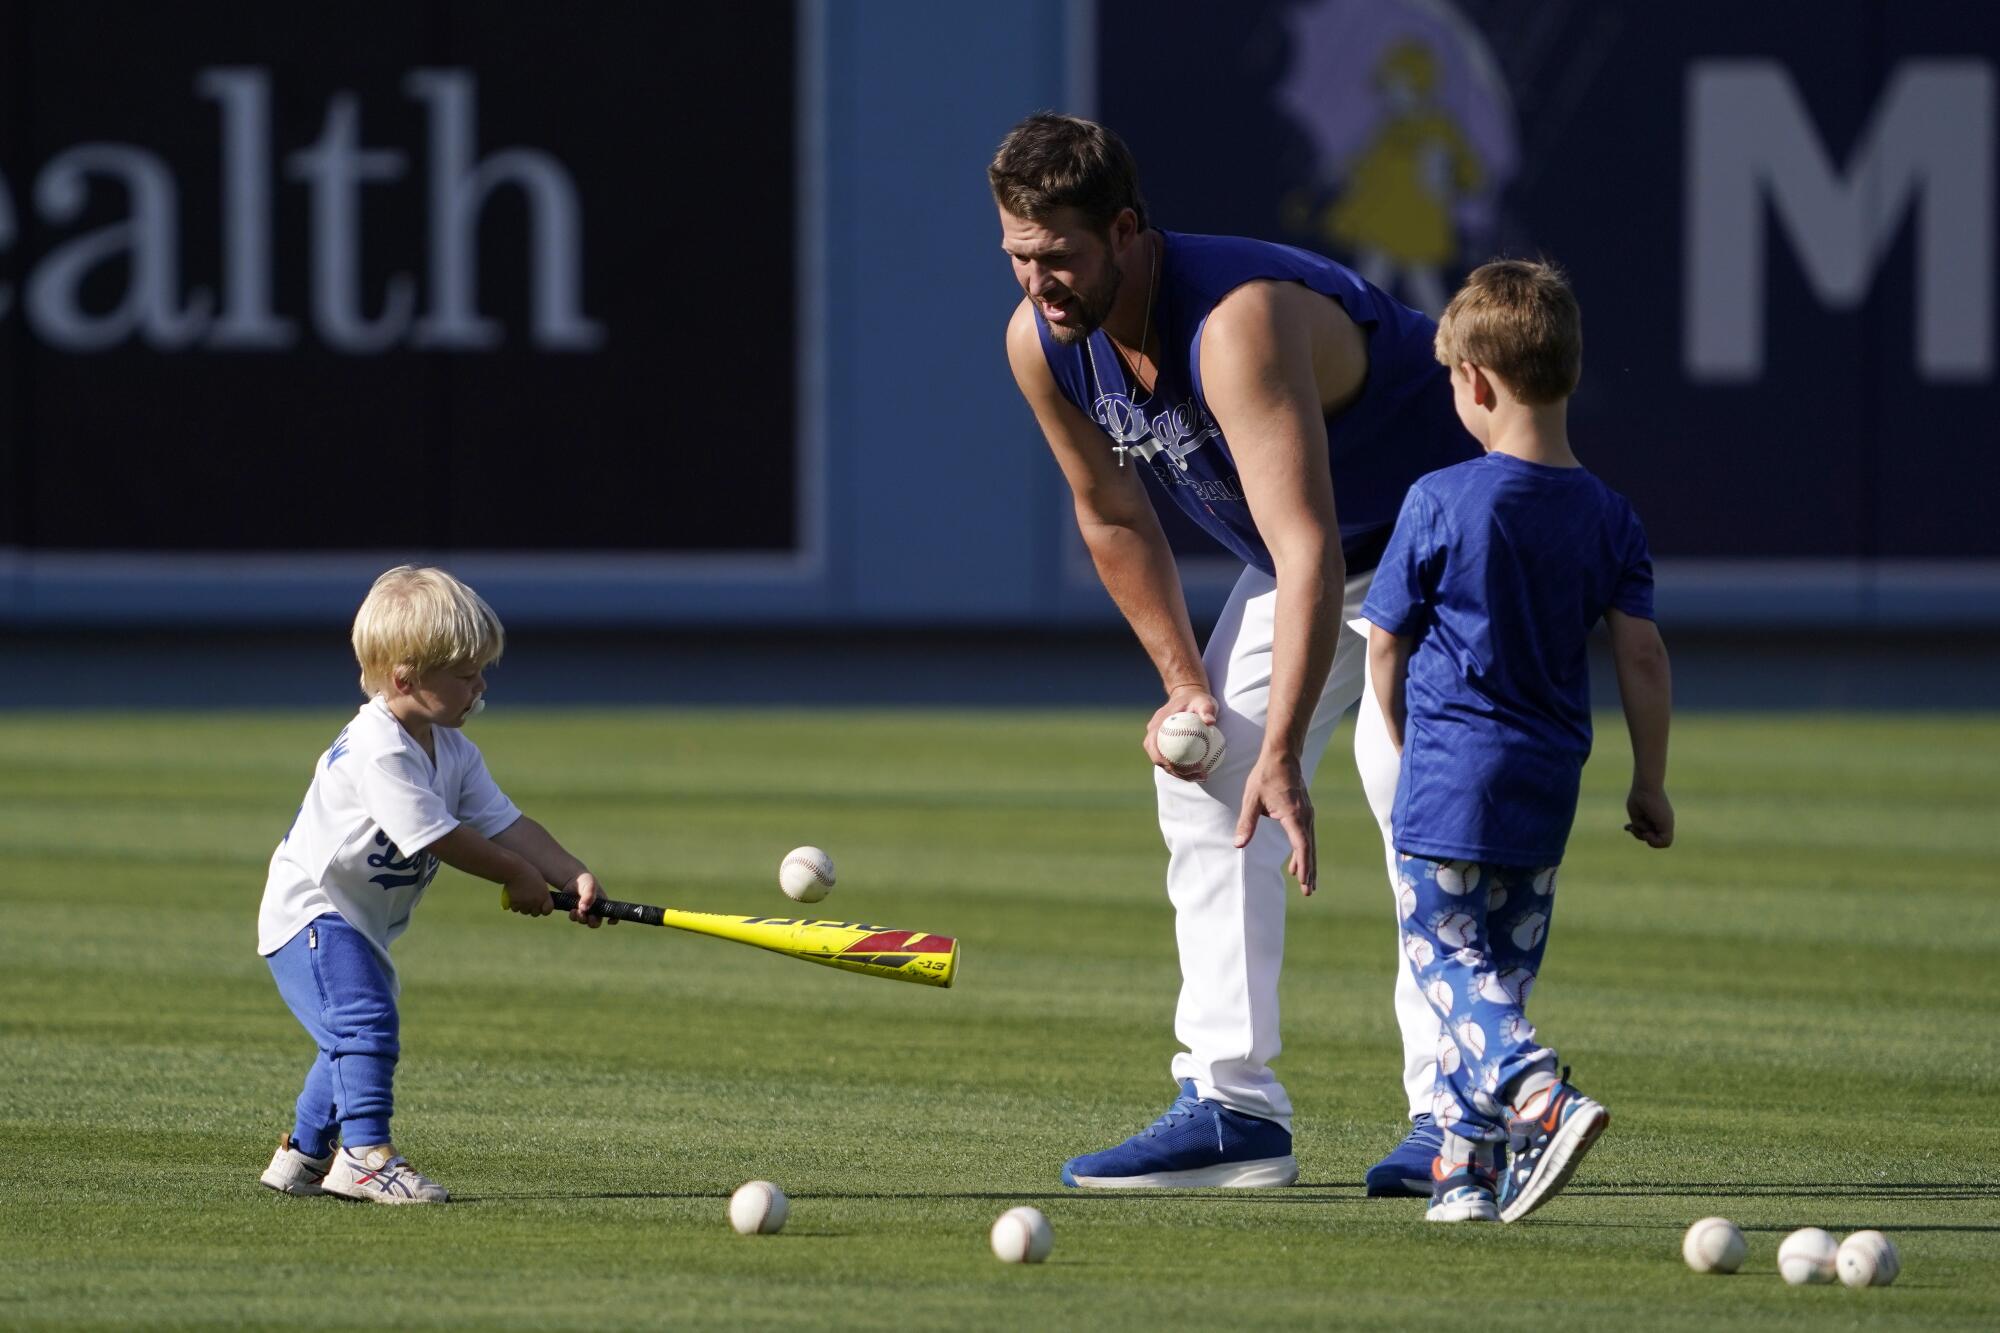 Clayton Kershaw's sons make trip to stadium to play ball with Dad